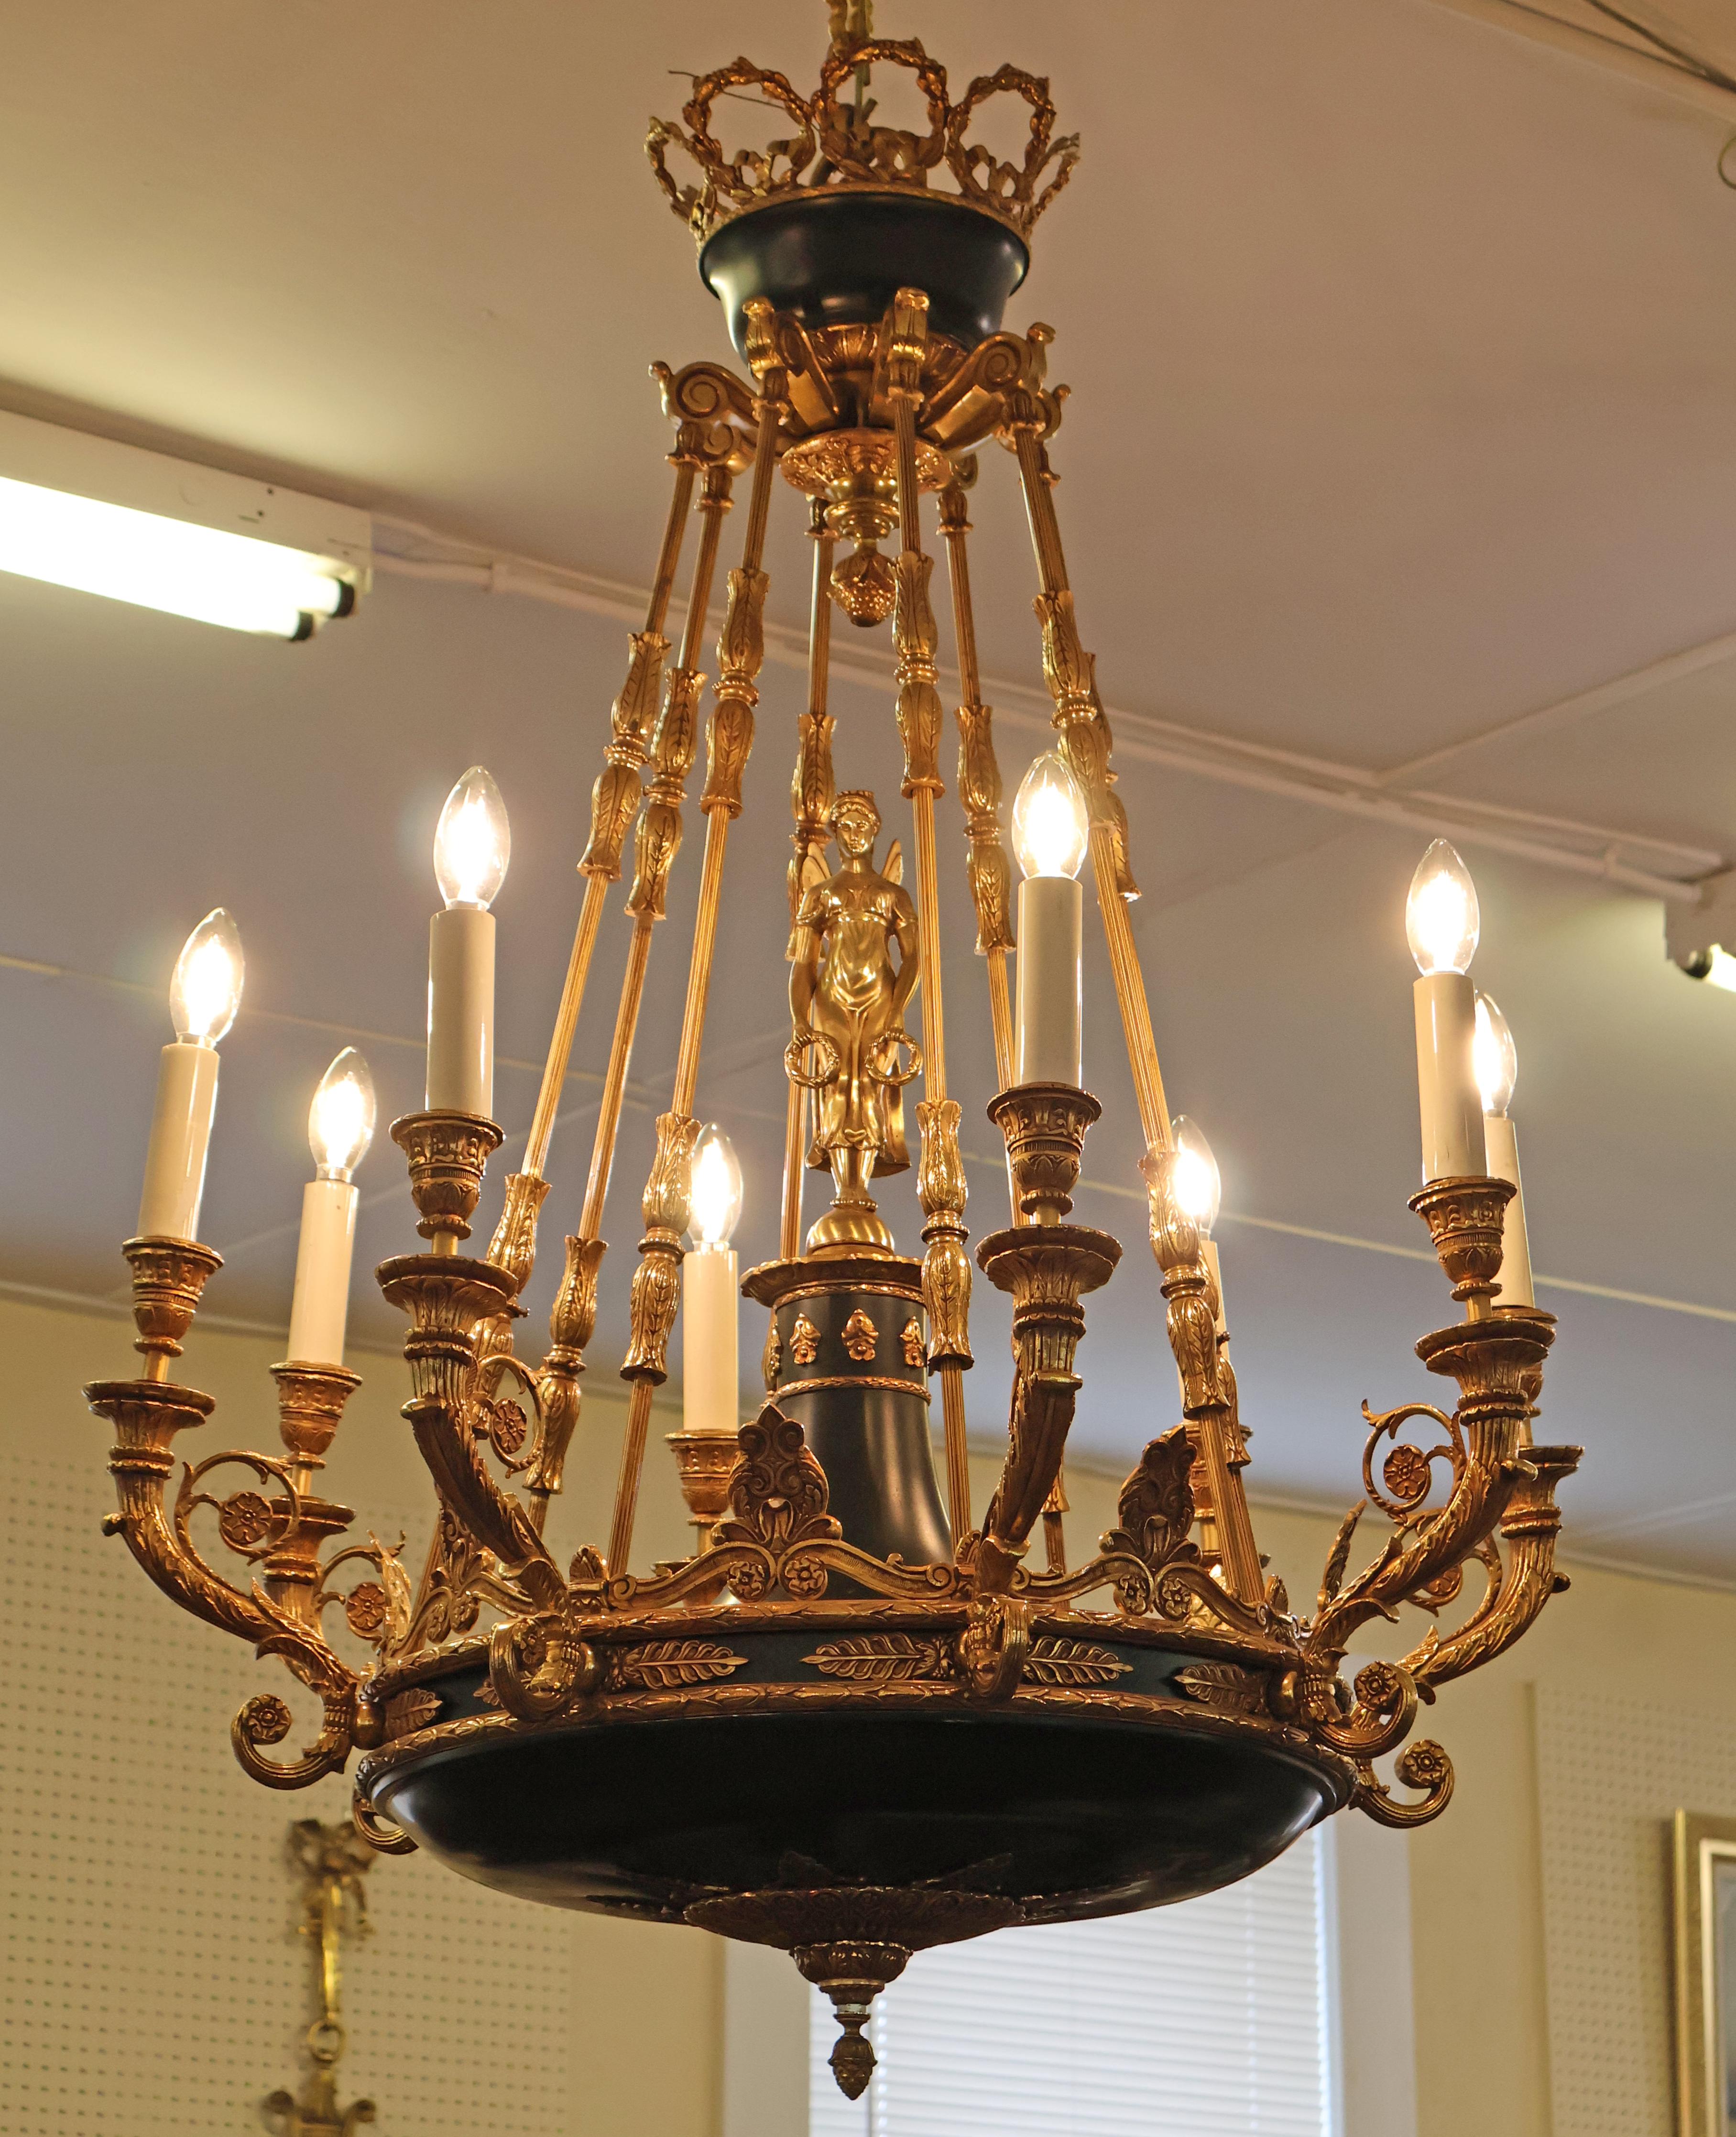 Excellent Italian Made French Empire Style 8 Light Bronze Chandelier 42 X 30

Dimensions : 42